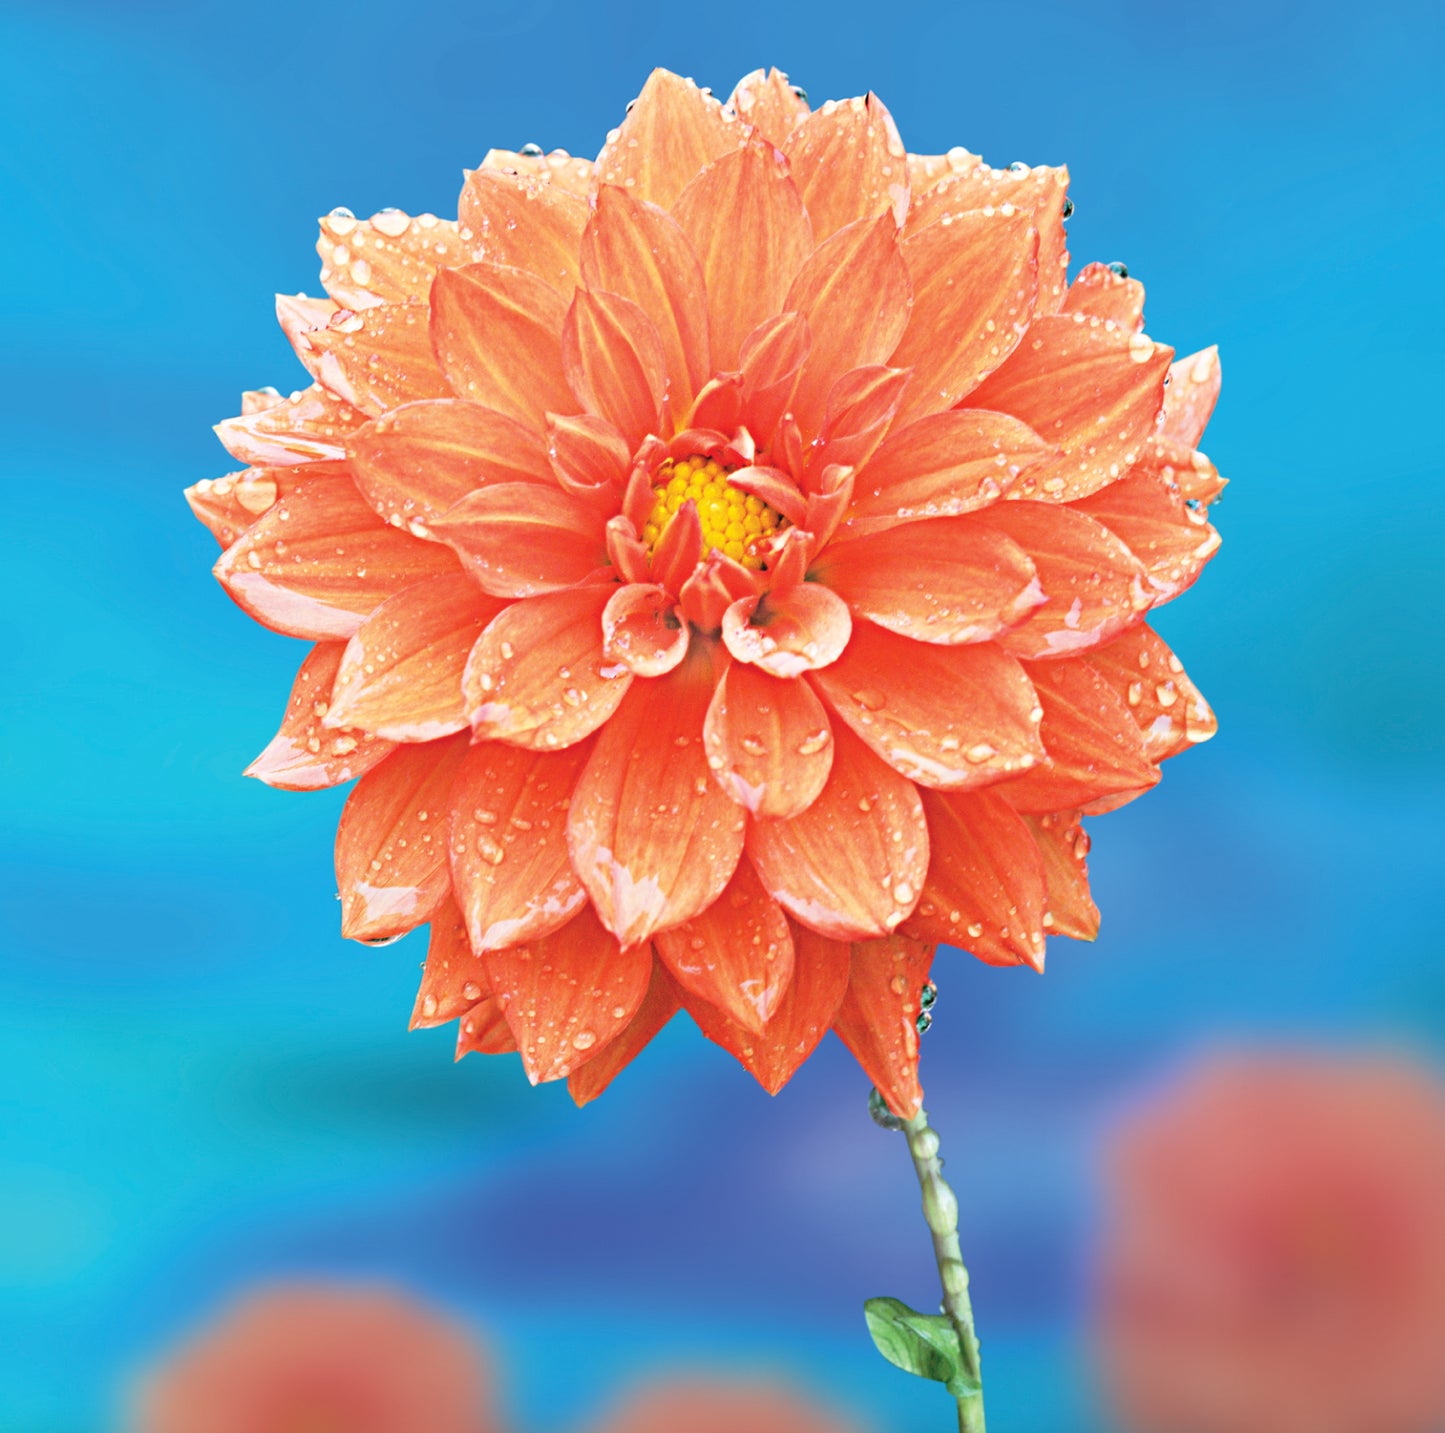 Orange Flower On Blue Blank Any Occasion Greeting Card